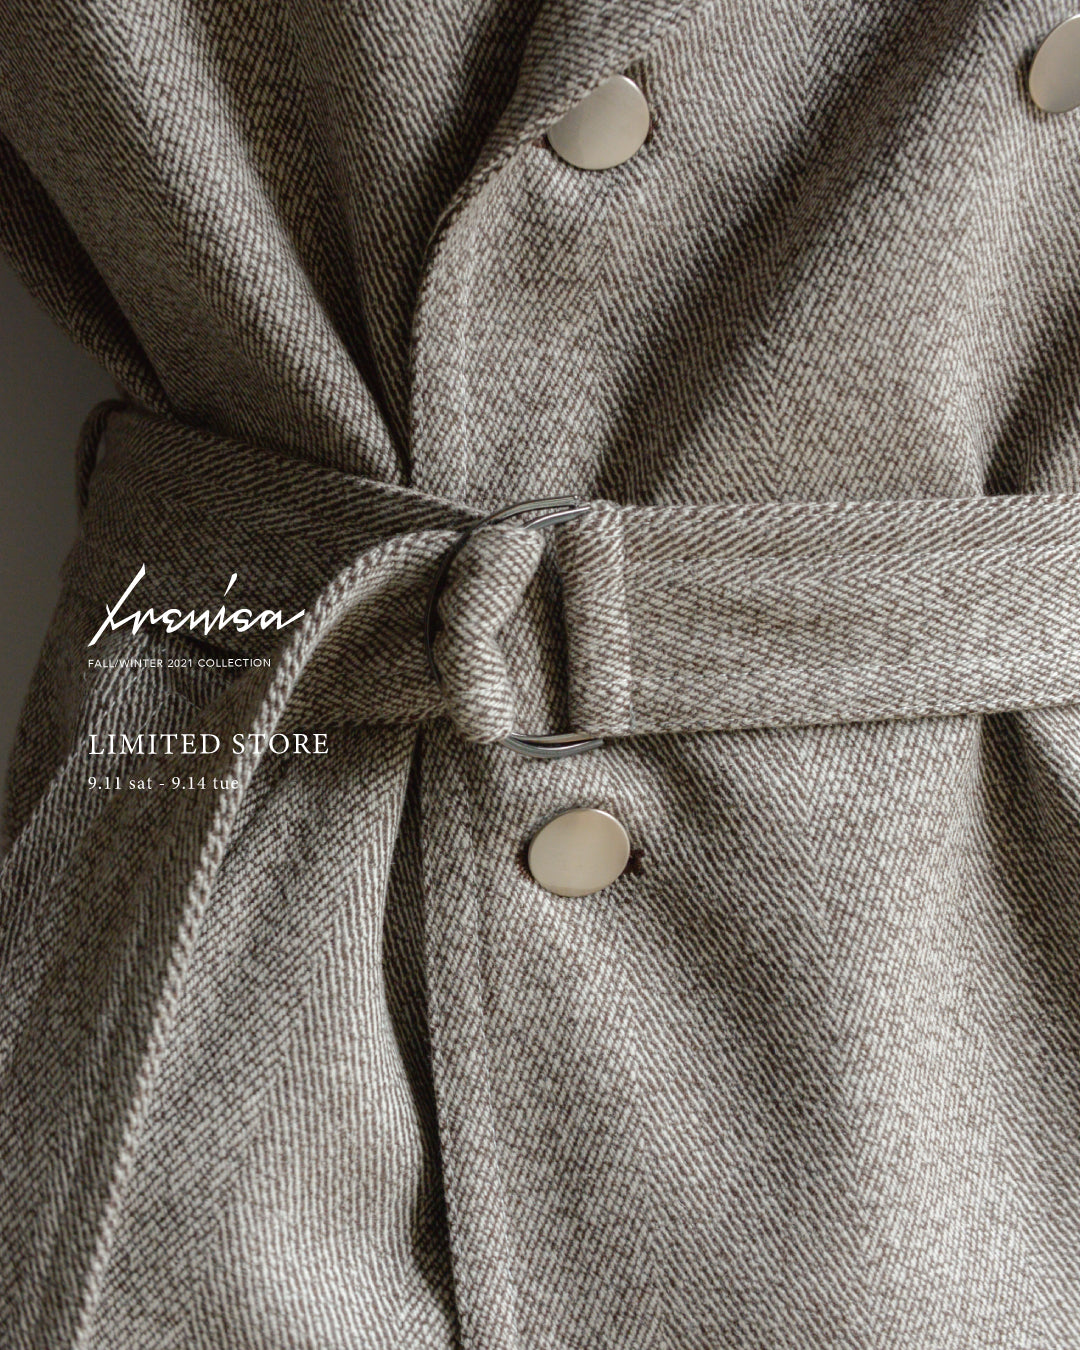 IRENISA 21AW LIMITED STORE lineup list – +81